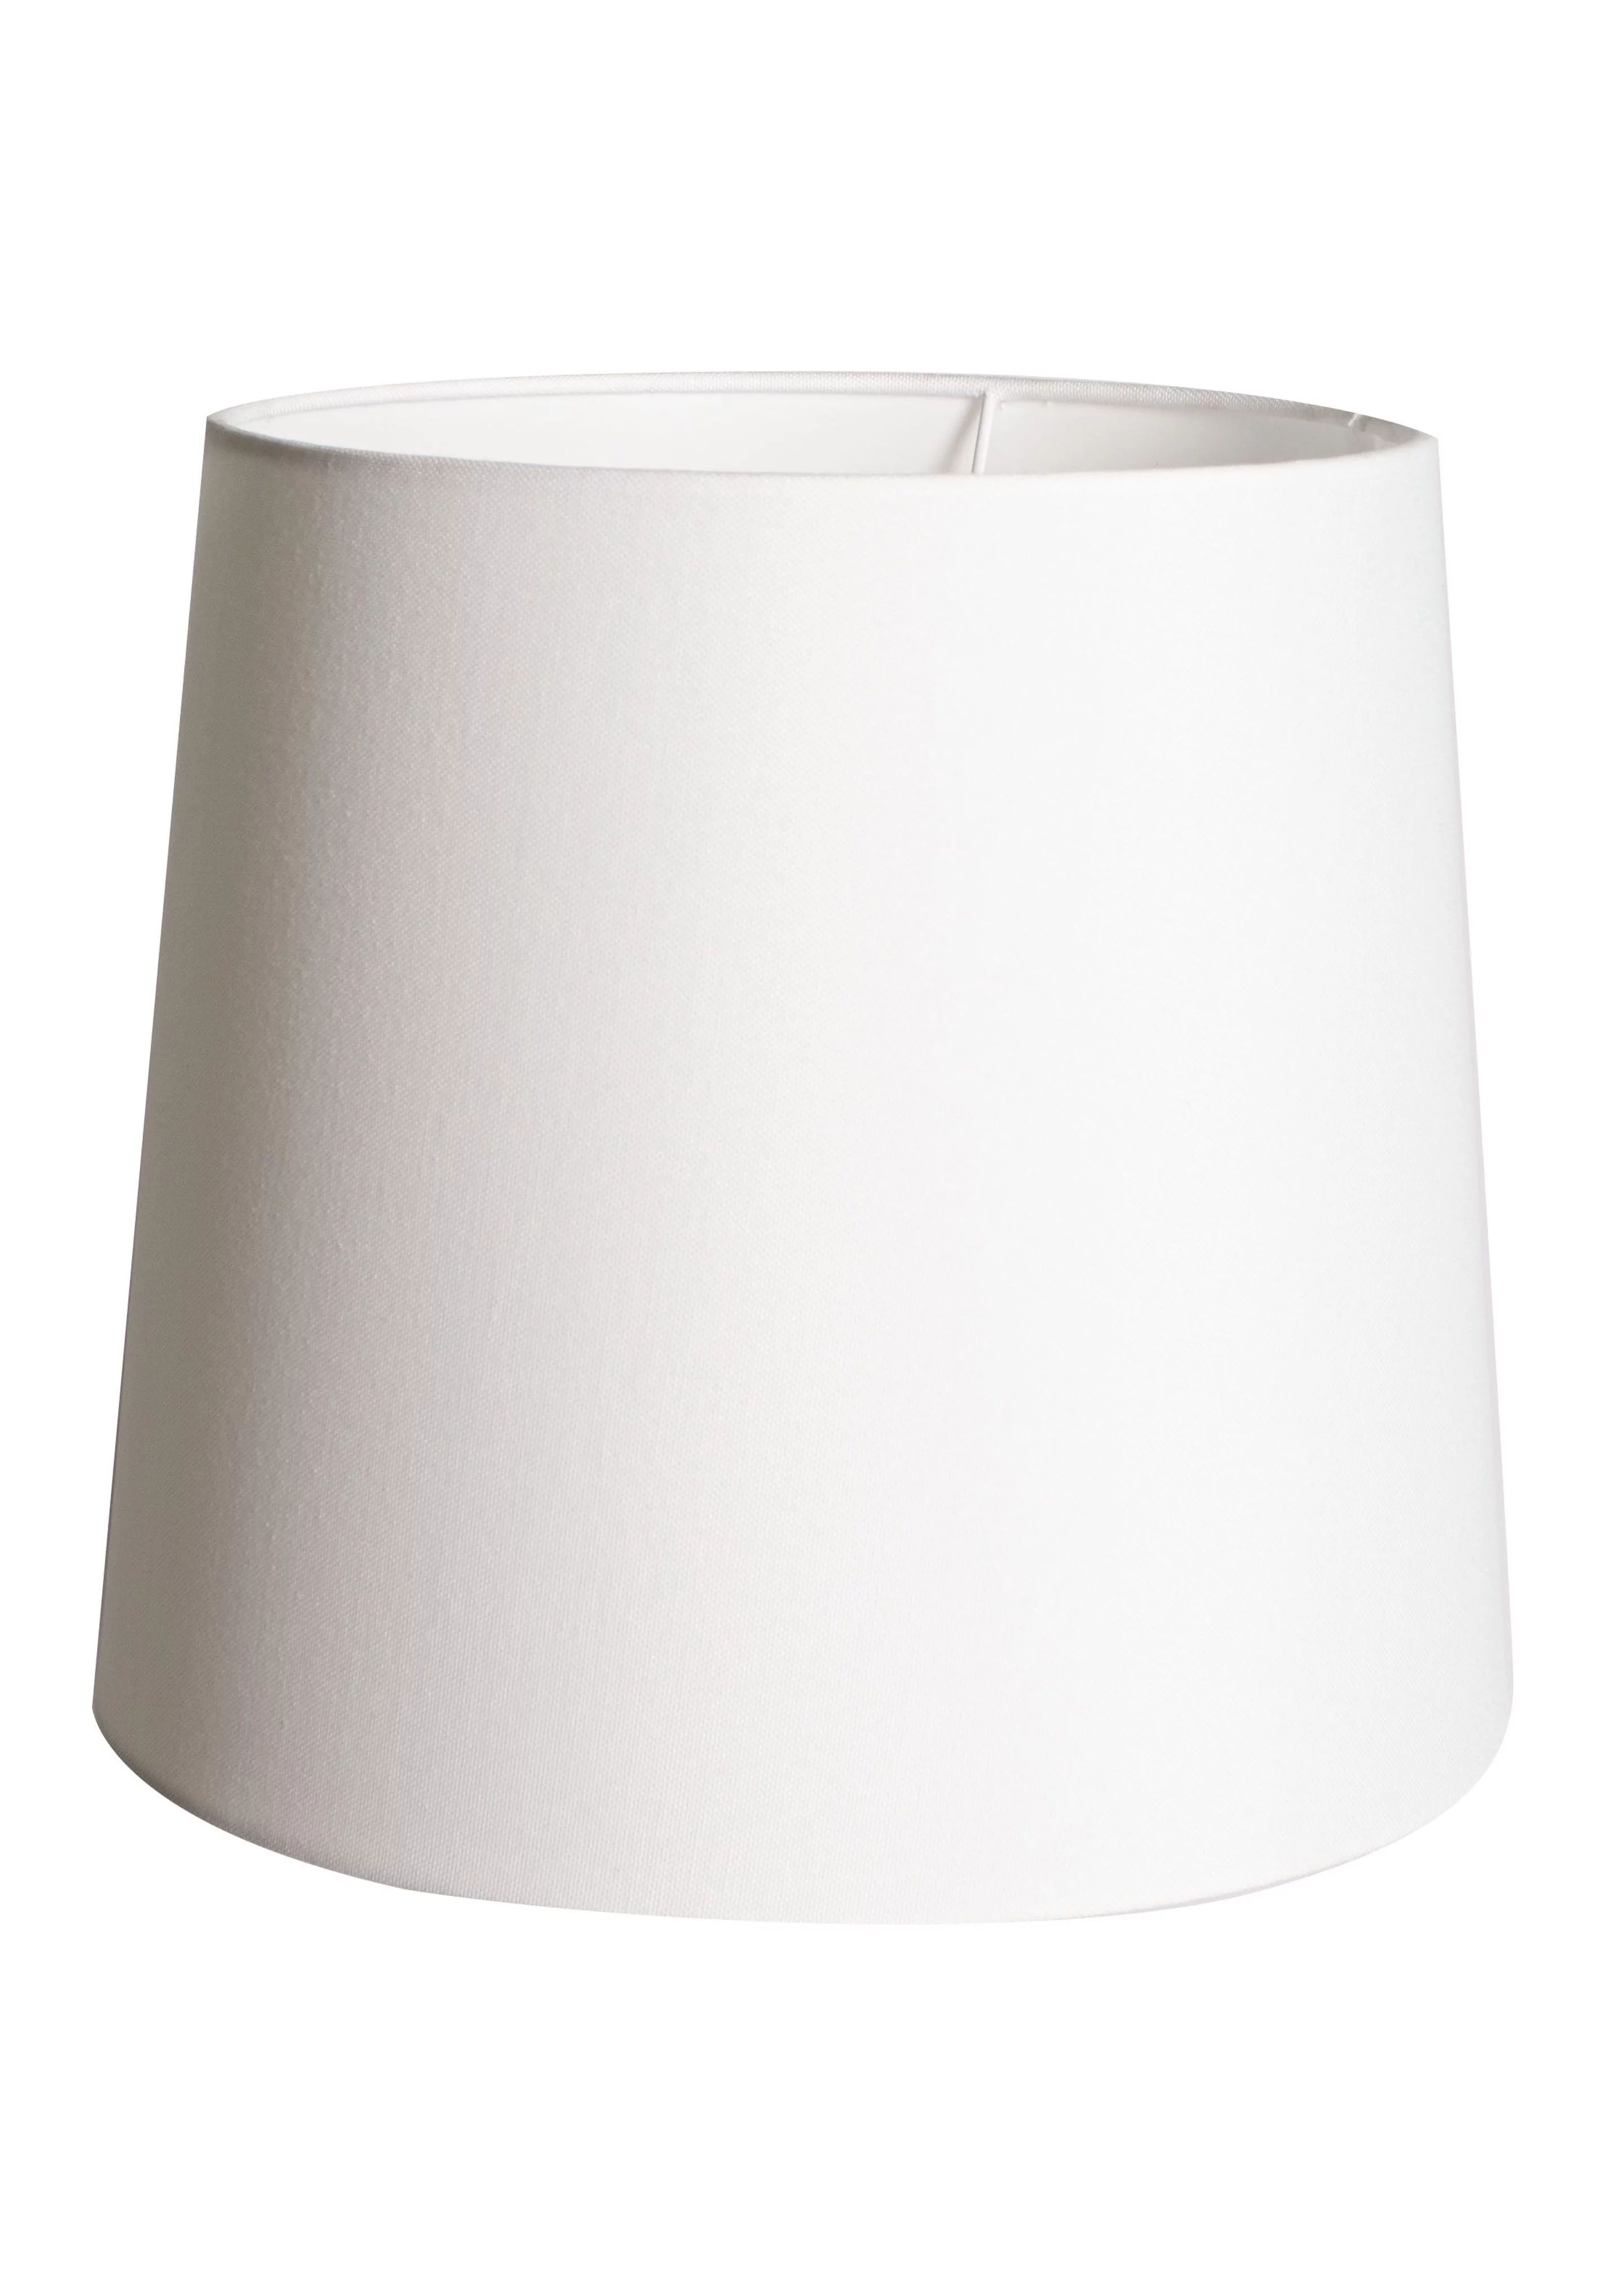 Simplee Adesso White Fabric Uno Lamp Shade, 11"H x 12"D, Transitional, Adult Office Or Dorm Room ... | Walmart (US)